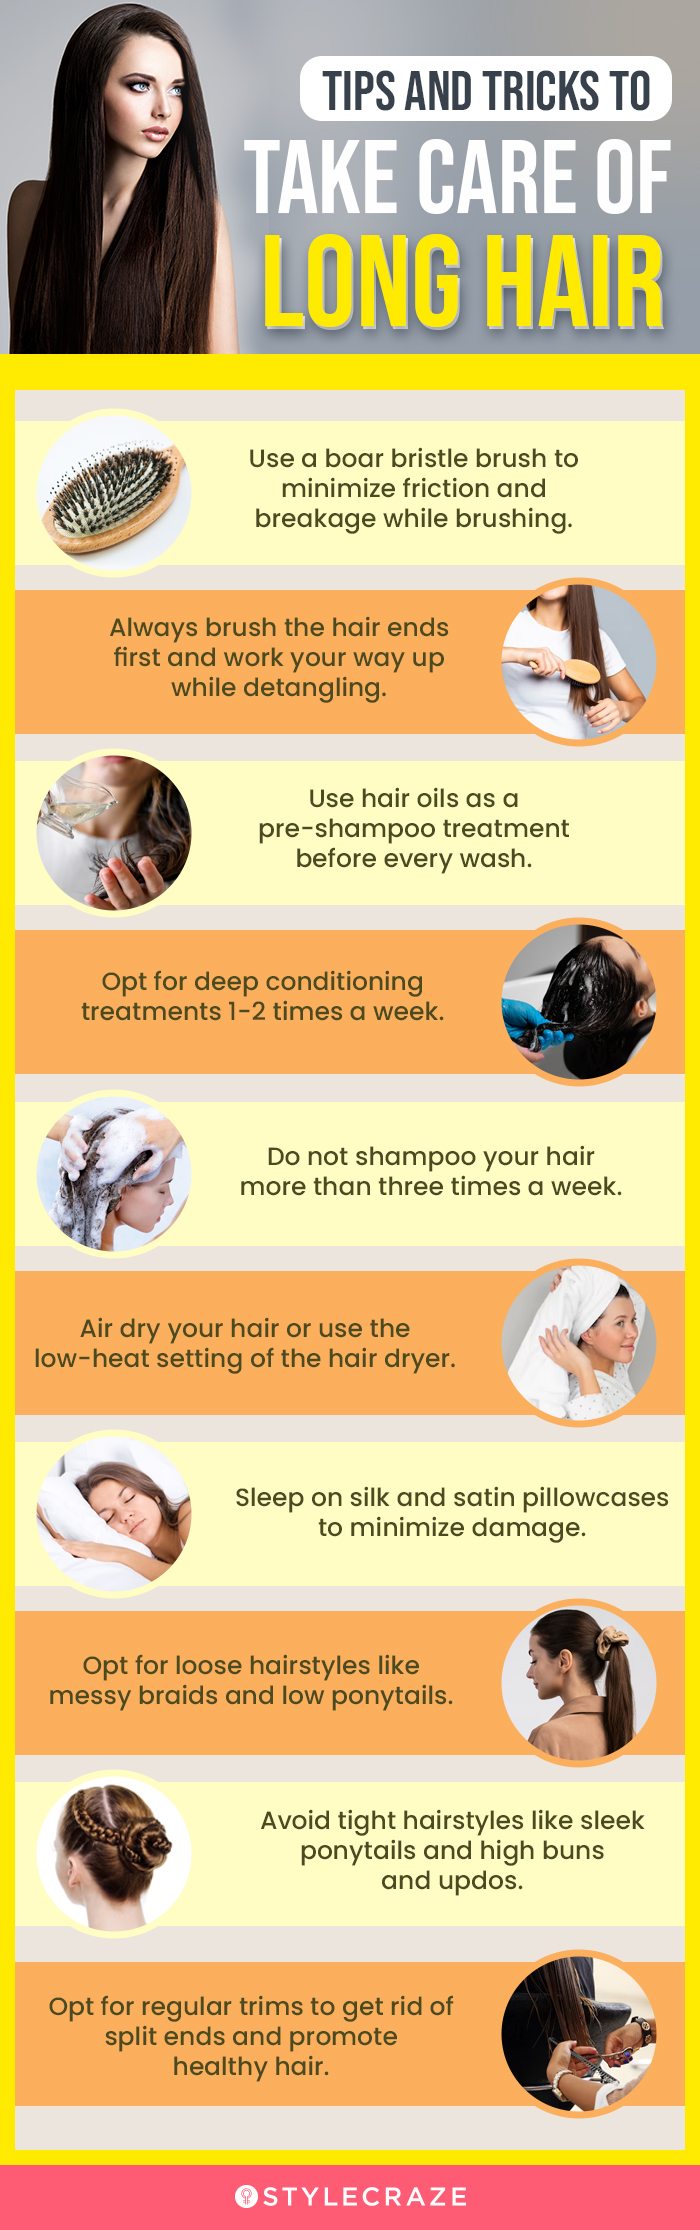 Tips And Trick To Take Care Of Long Hair (infographic)